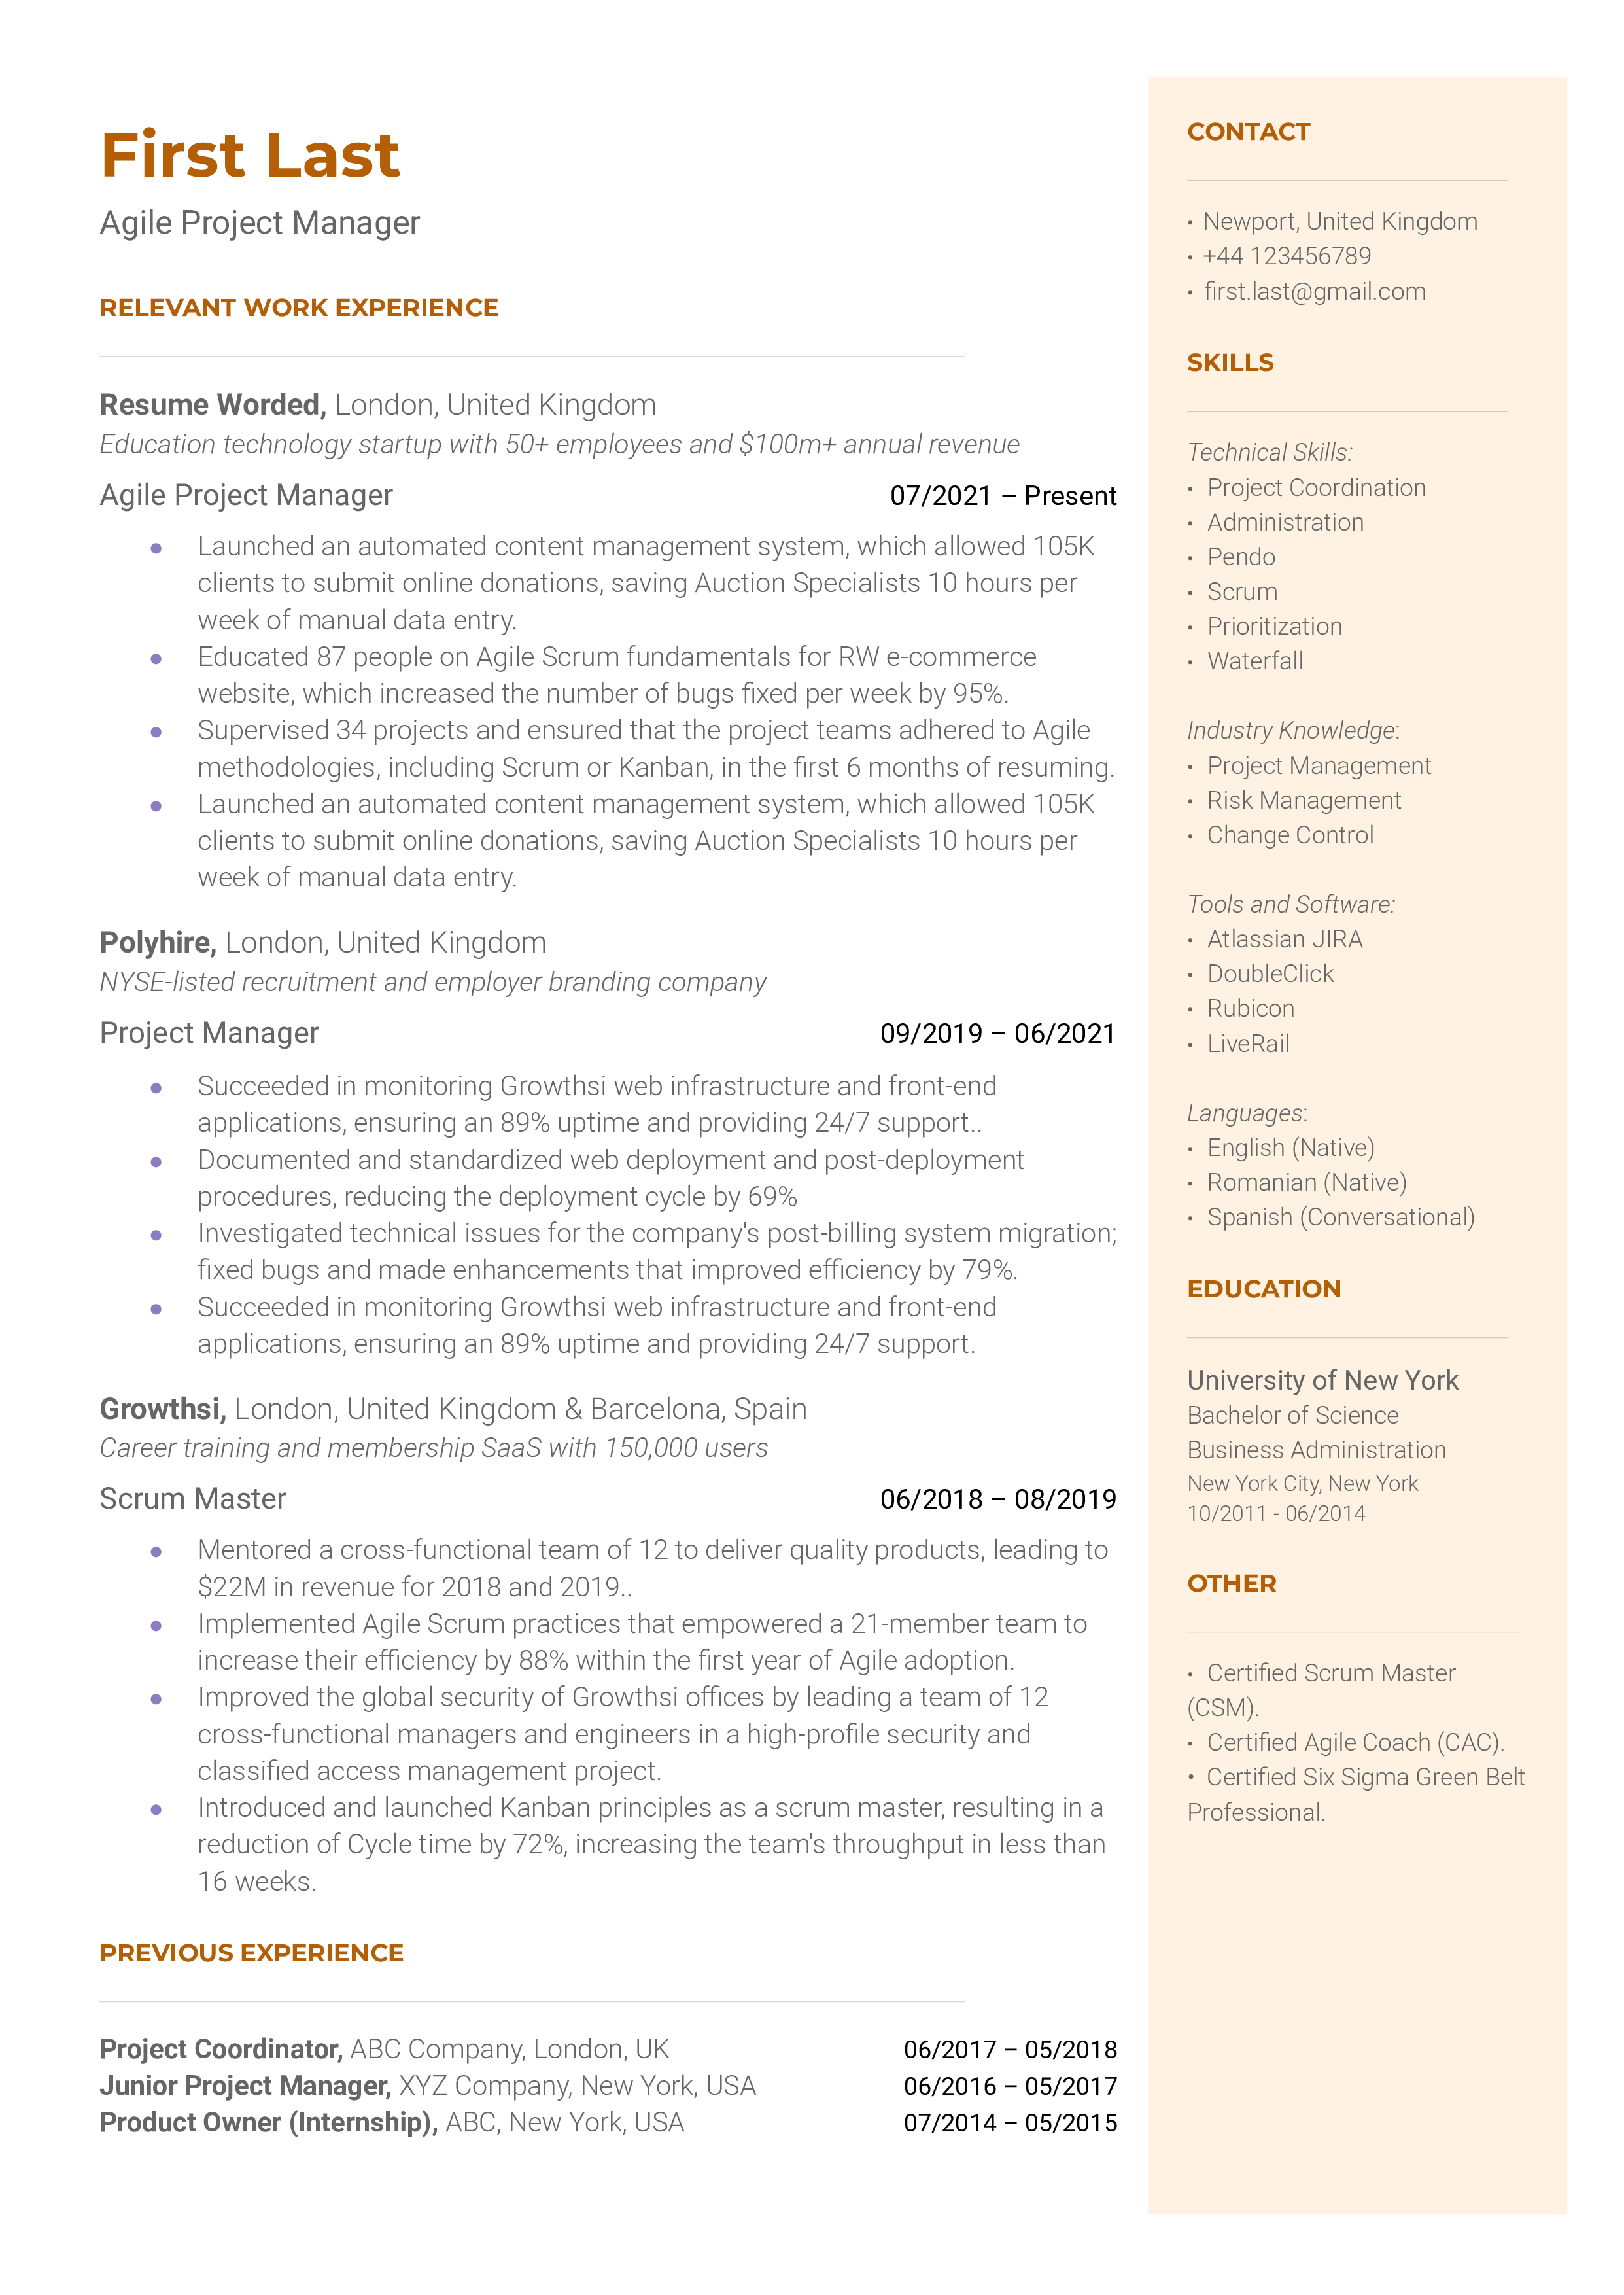 An Agile project manager resume sample that highlights the applicant's Agile experience and certification.